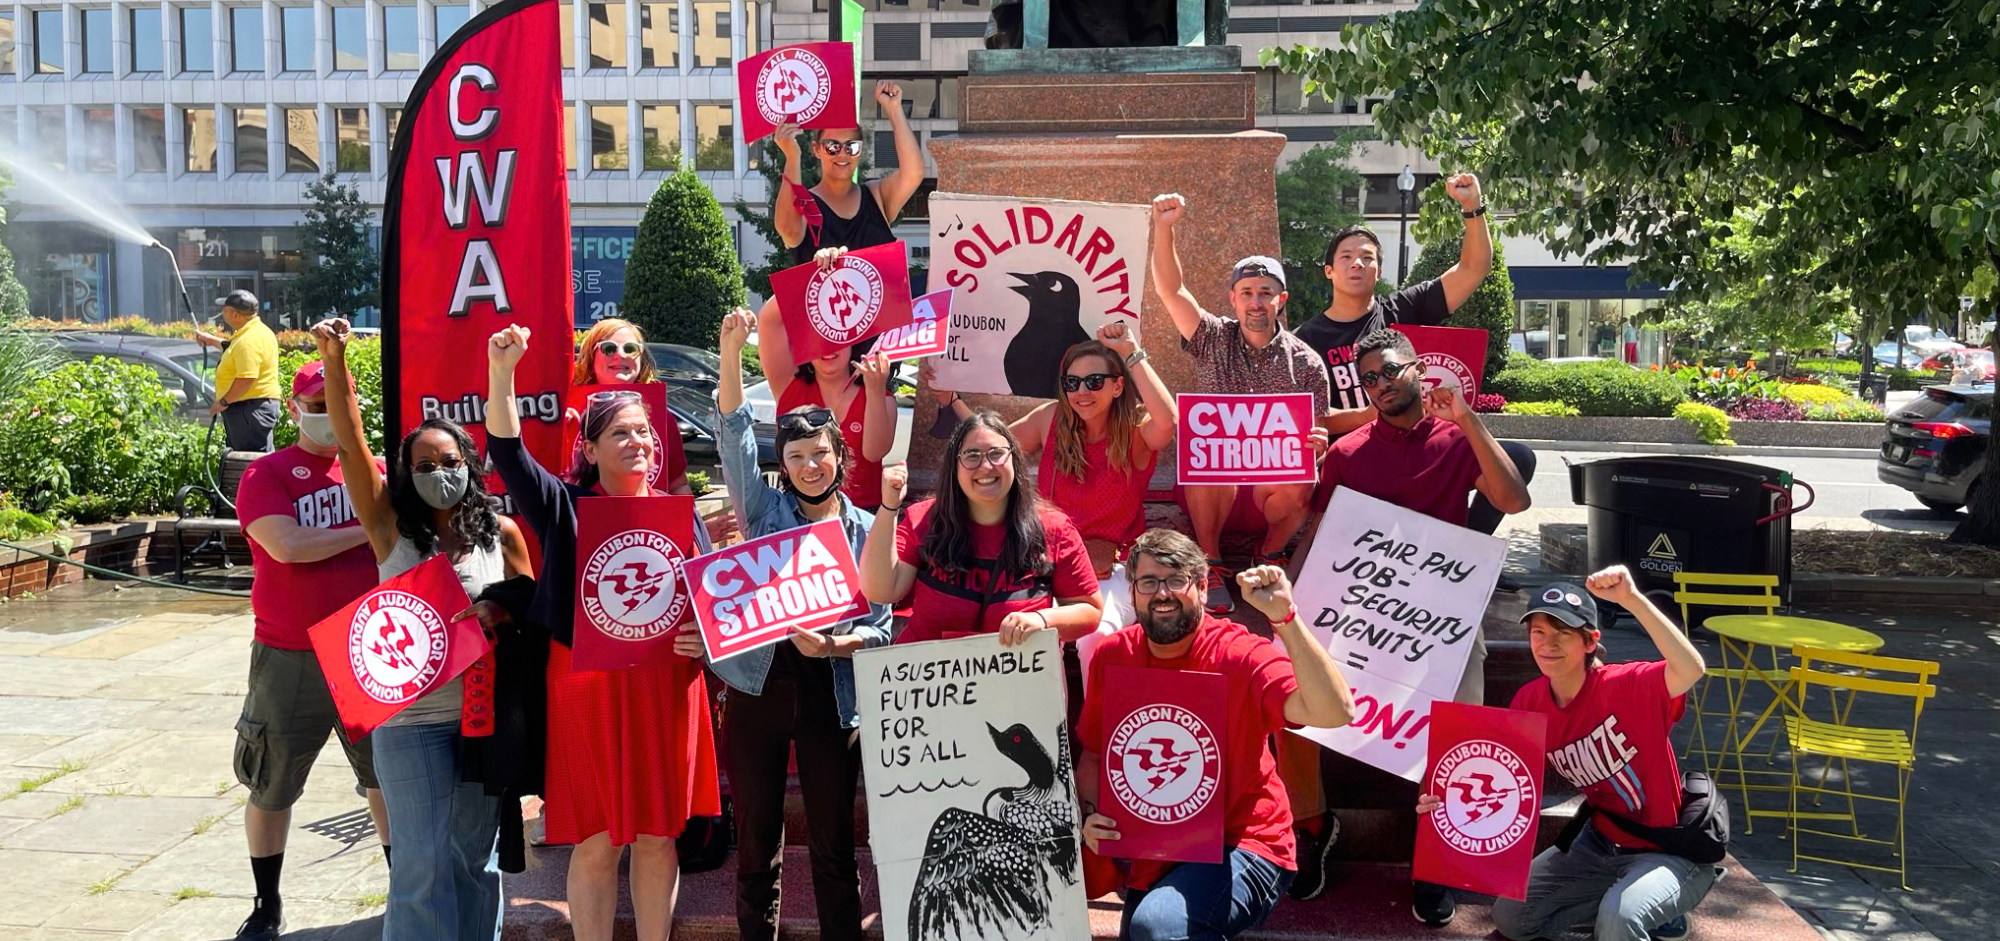 Bird union member rally to protect workers!